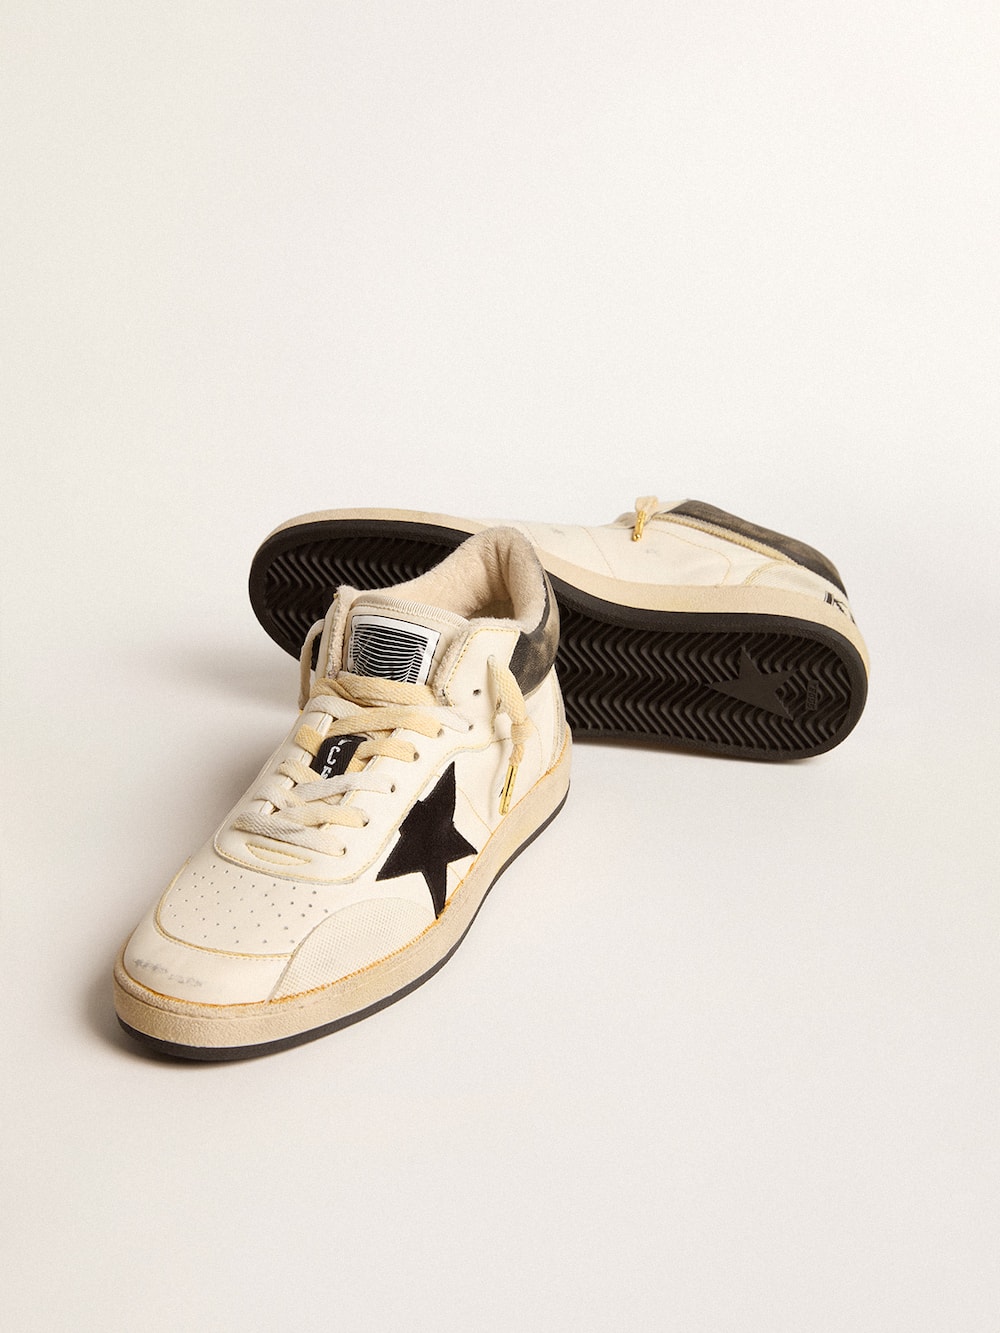 Golden Goose - Men’s Ball Star Pro Mid in aged white leather with black star in 